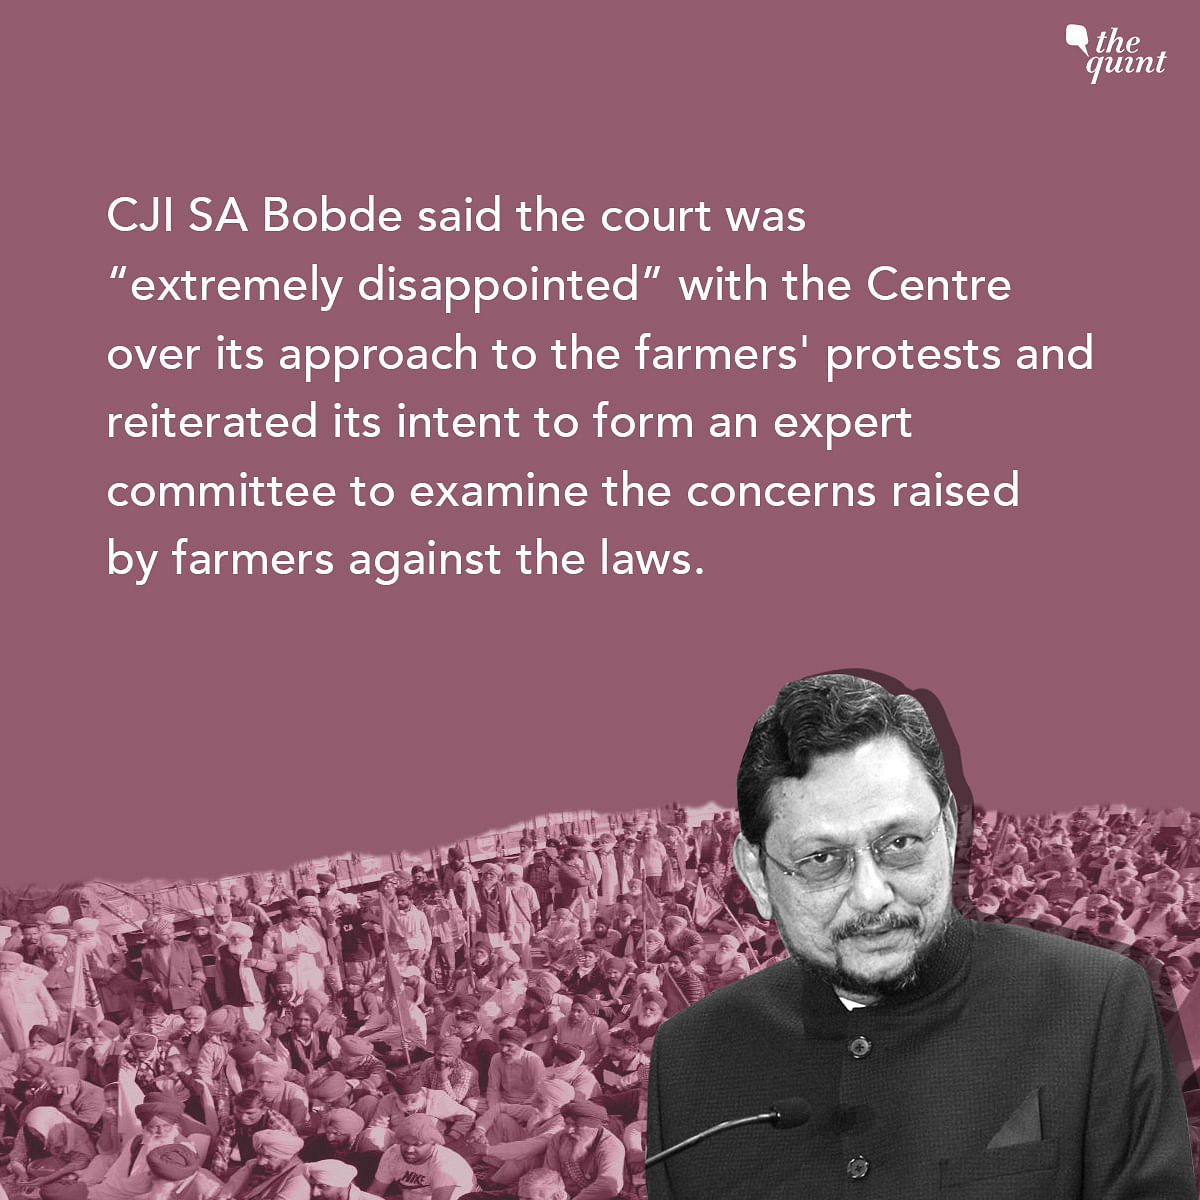 The court is hearing several petitions regarding the farmers’ protests on the borders of Delhi.